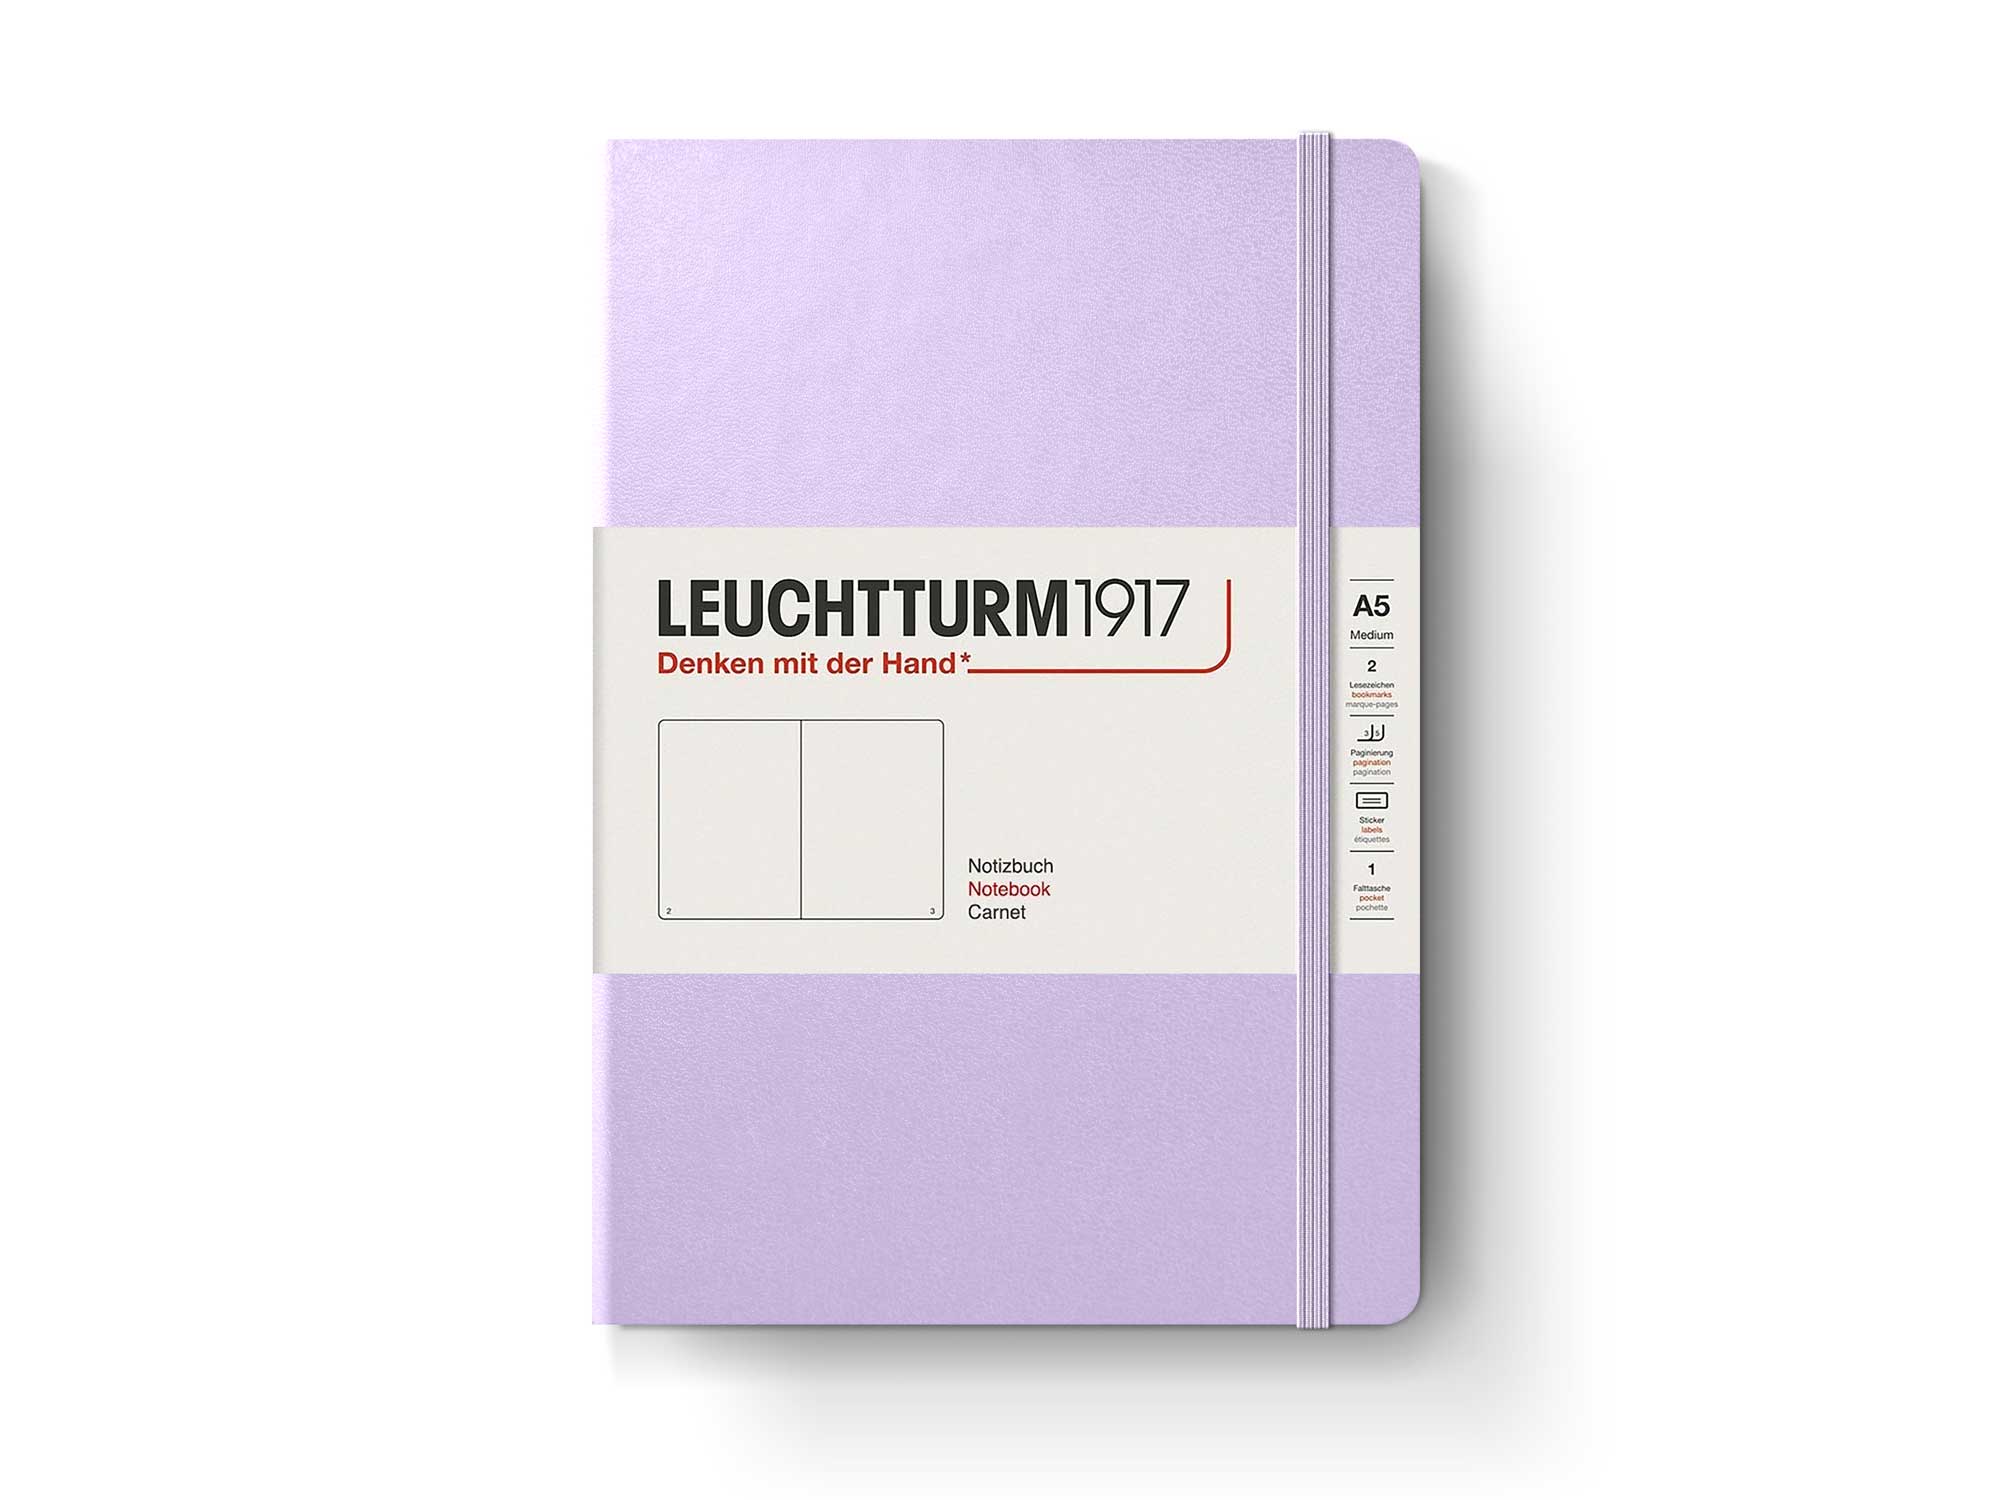  LEUCHTTURM1917 - Notebook Hardcover Medium A5-251 Numbered  Pages for Writing and Journaling (Berry, Dotted) : Office Products